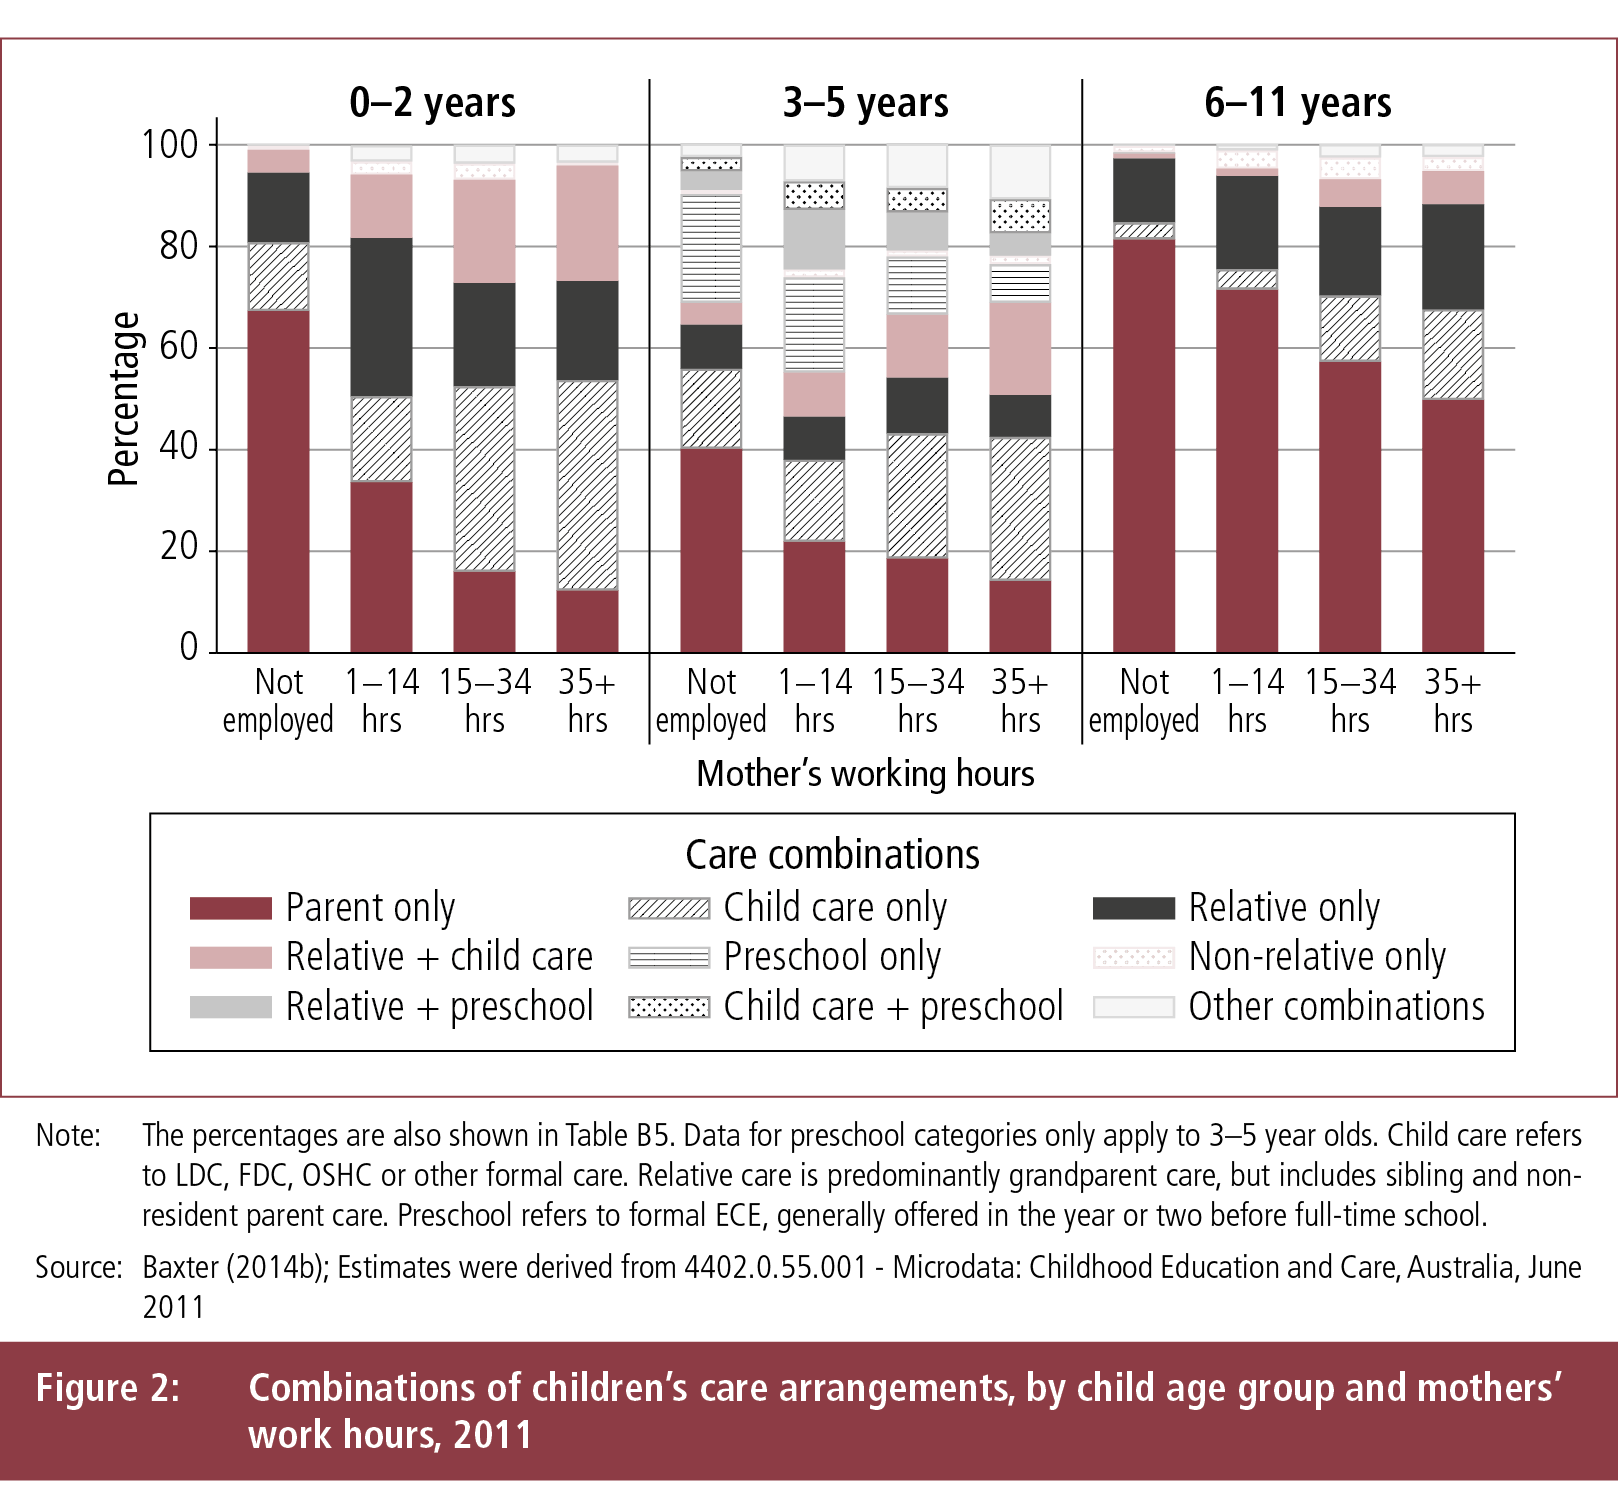 Figure 2: Combinations of children's care arrangements, by child age group and mothers' work hours, 2011. Figure described in text.